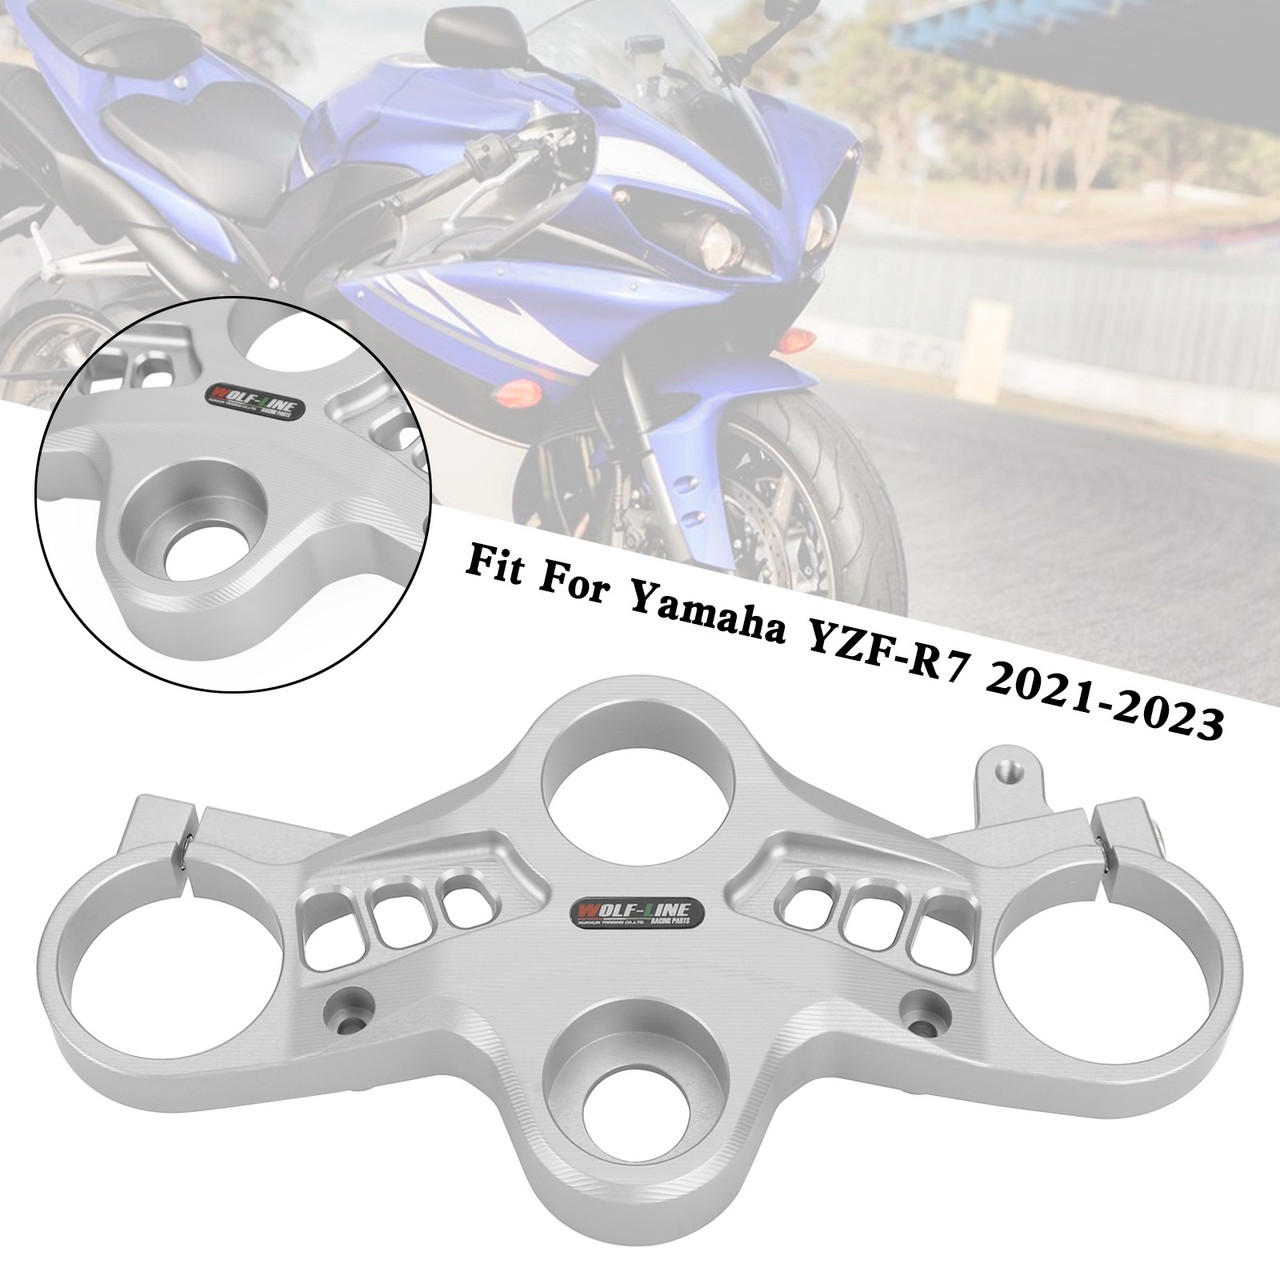 Aluminum Upper Front Top Triple Tree Clamp For Yamaha YZF-R7 2021-2023 SIL